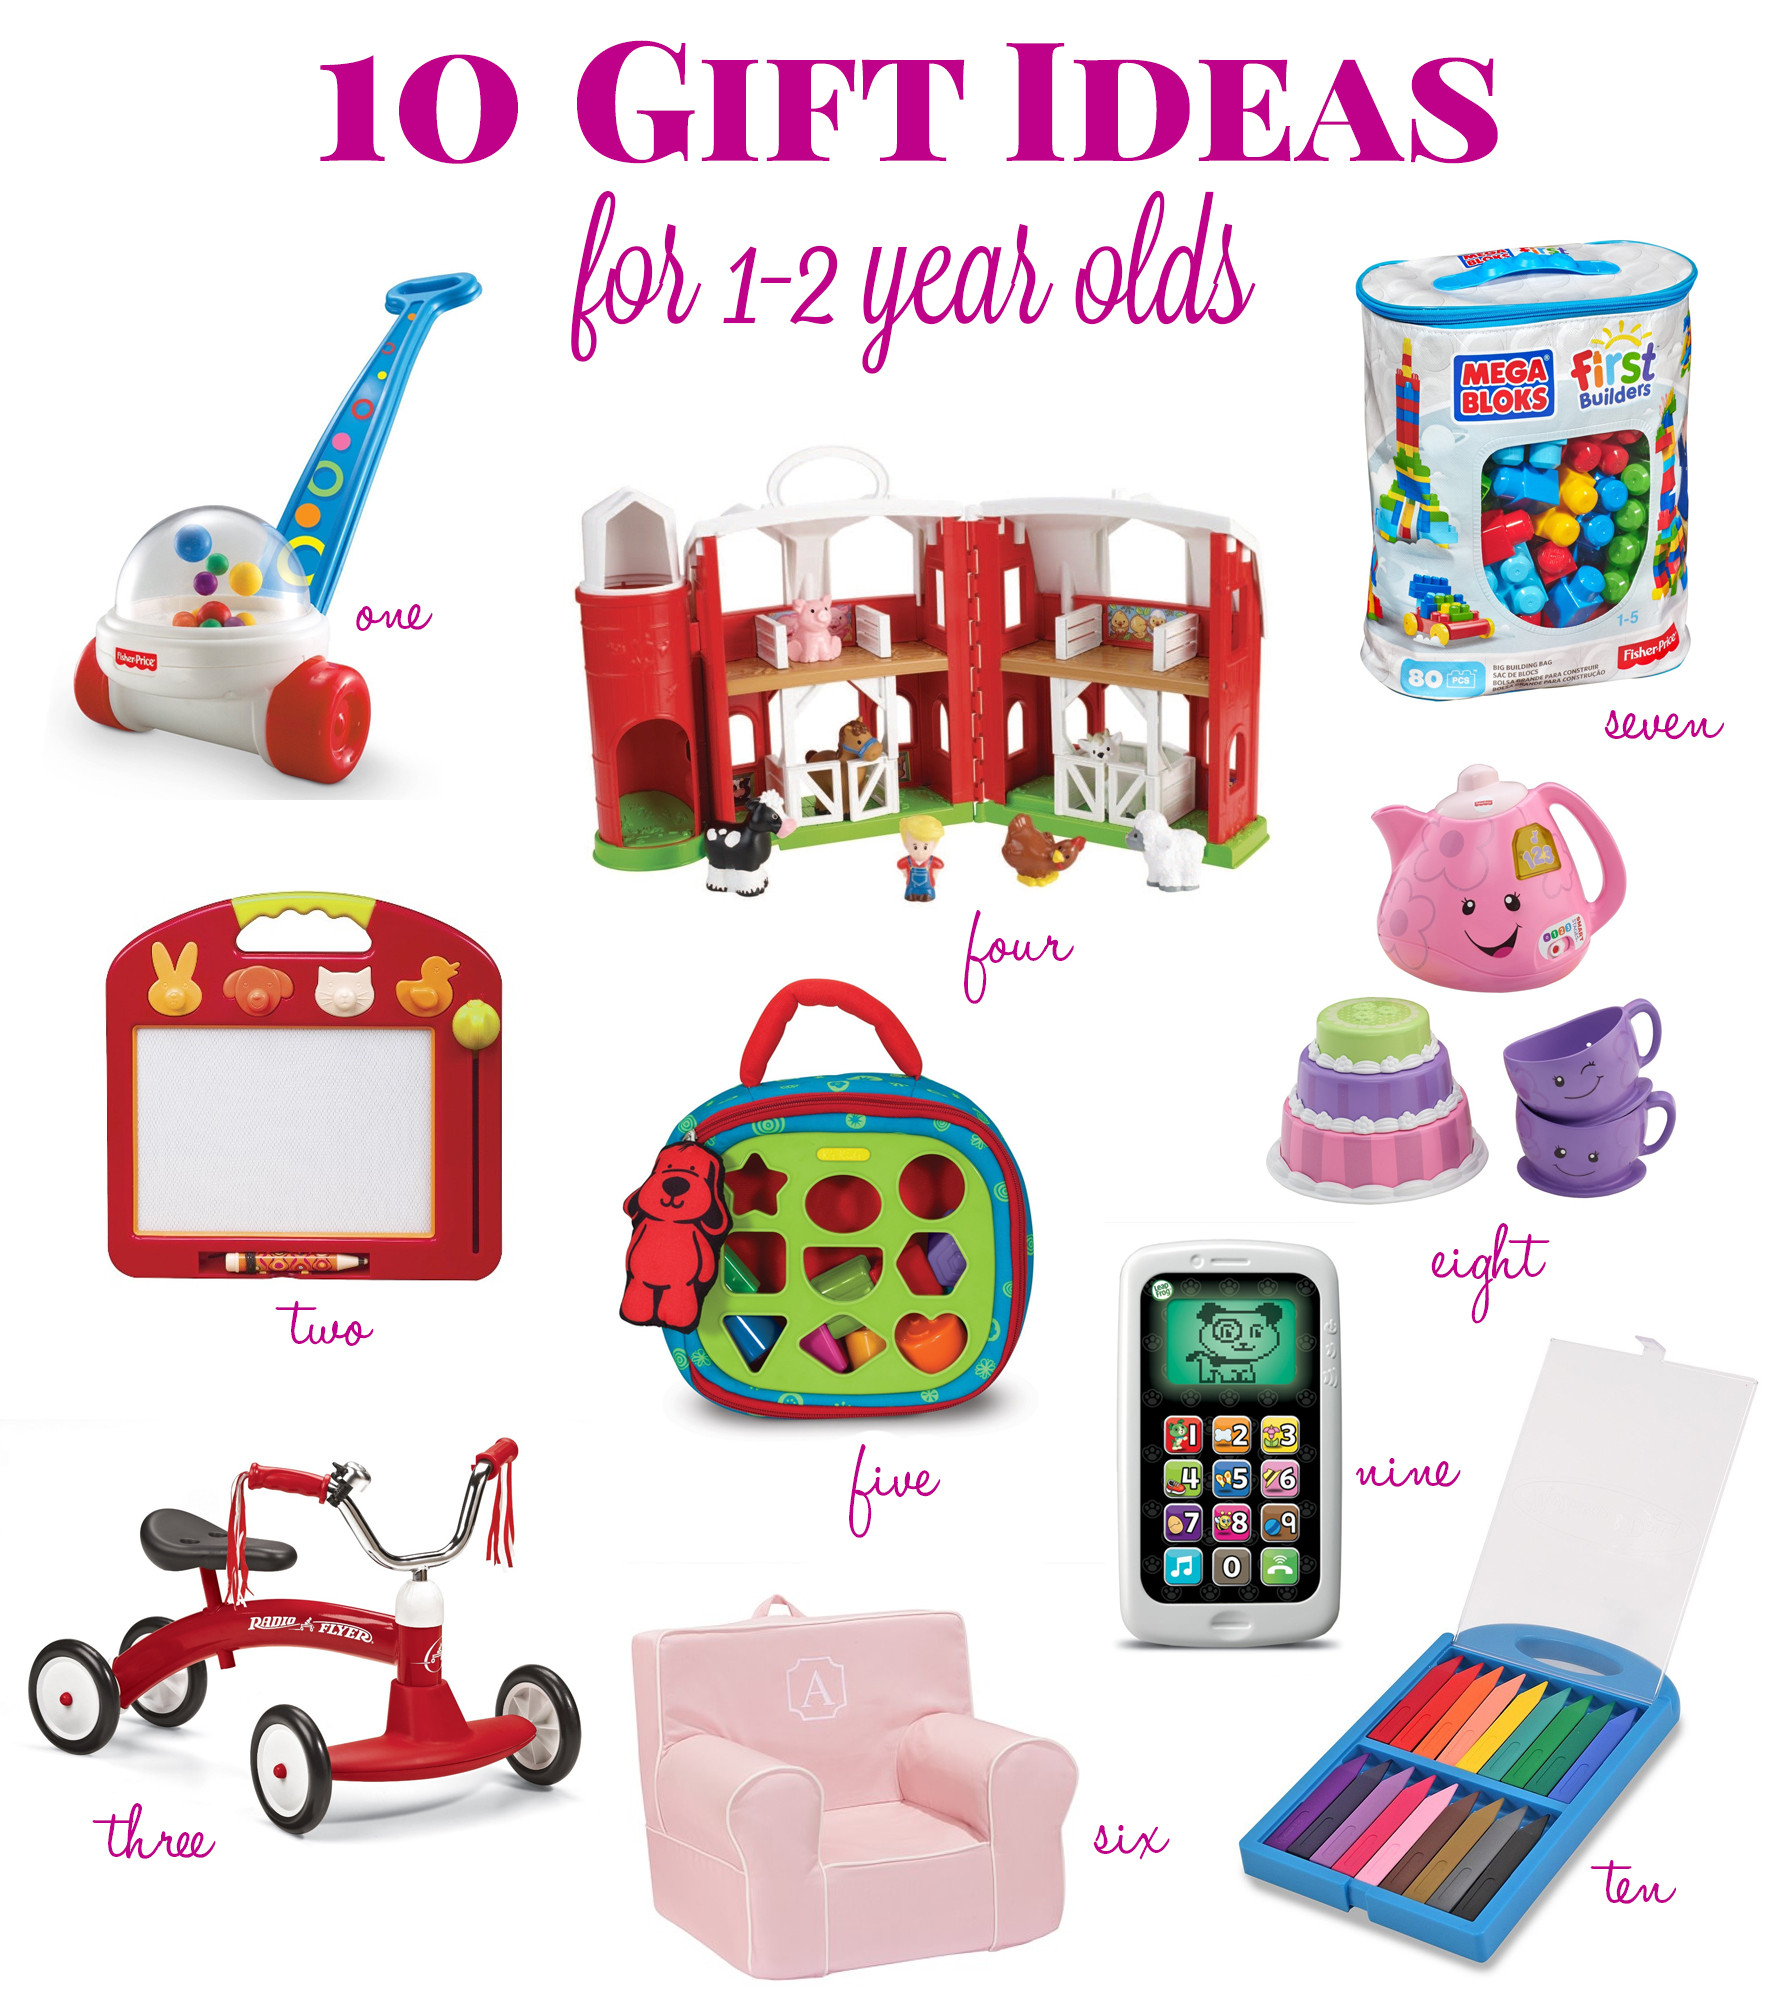 Gift Ideas For 1 Year Old Girls
 Gift Ideas for a 1 Year Old Life s Tidbits